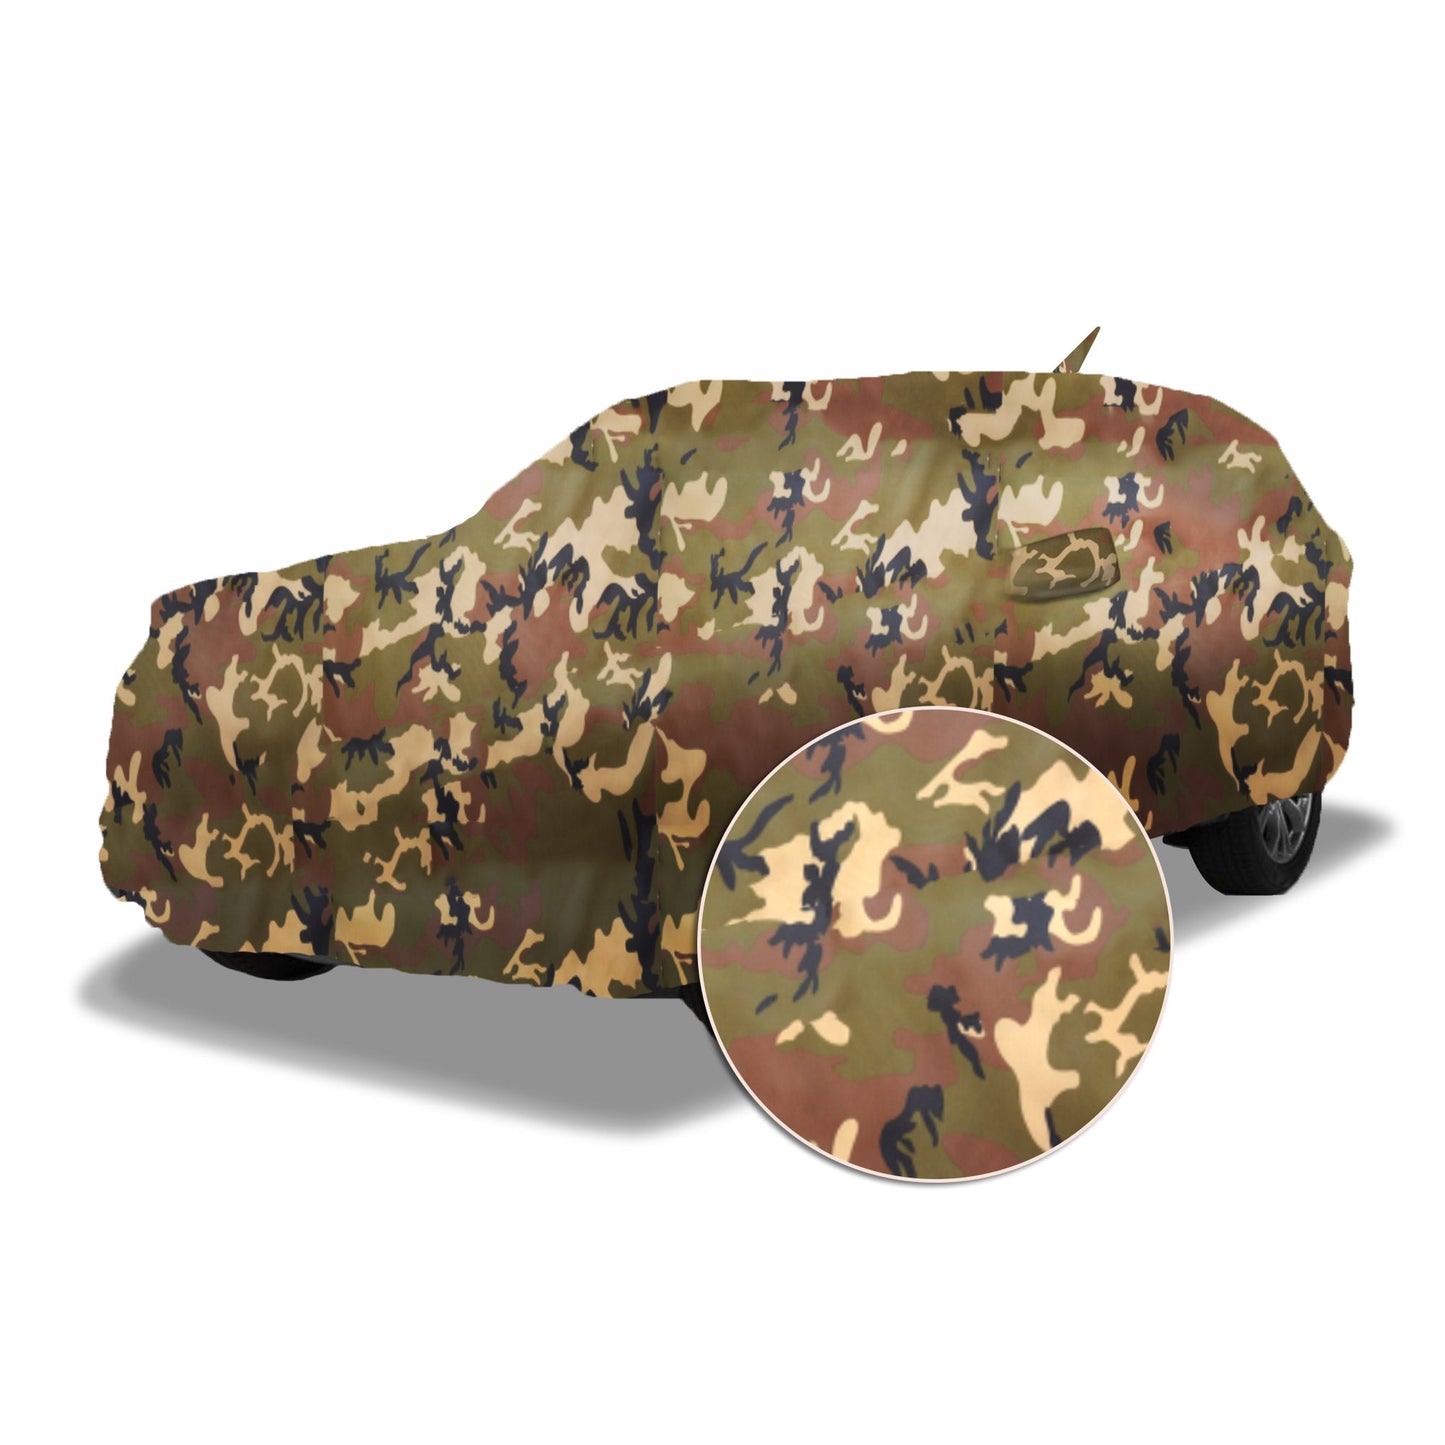 Ascot Tata Harrier Car Body Cover Extra Strong & Dust Proof Jungle Military Car Cover with UV Proof & Water-Resistant Coating